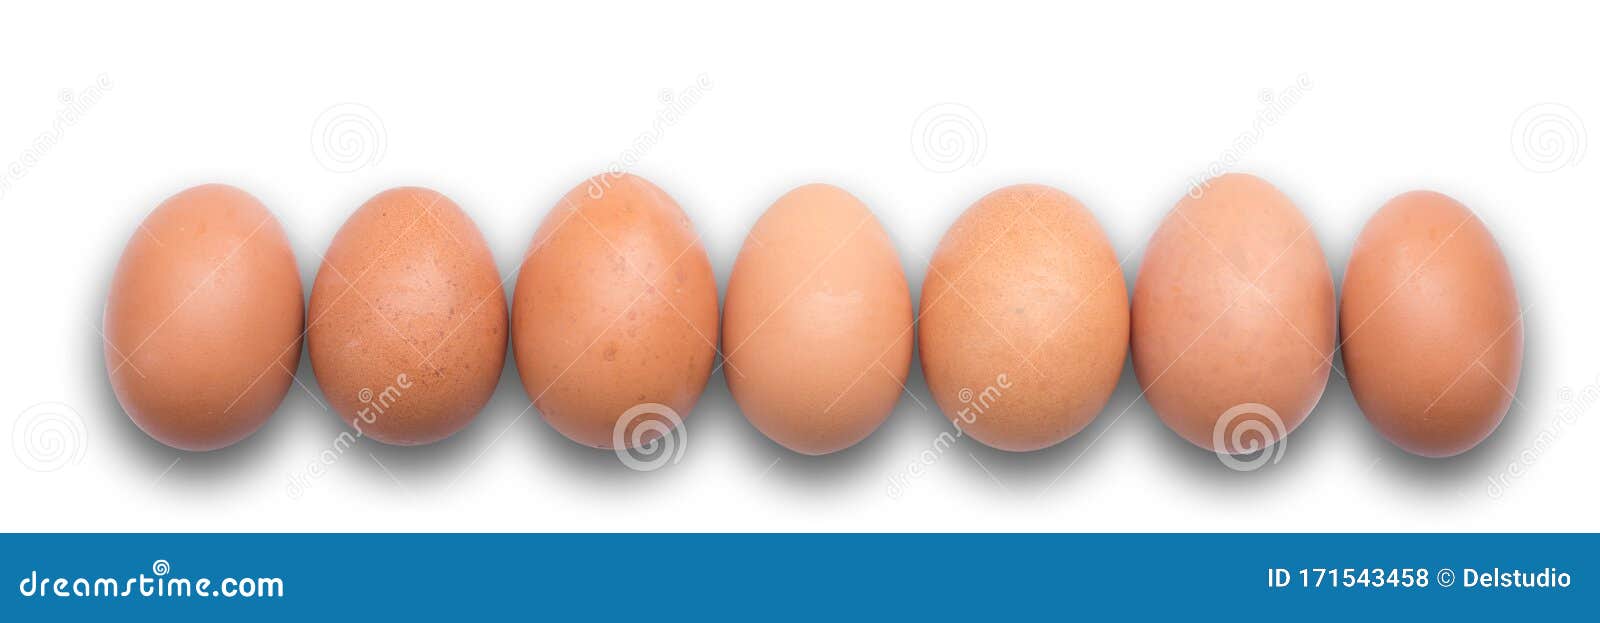 eggs aligned in a row on panoramic background